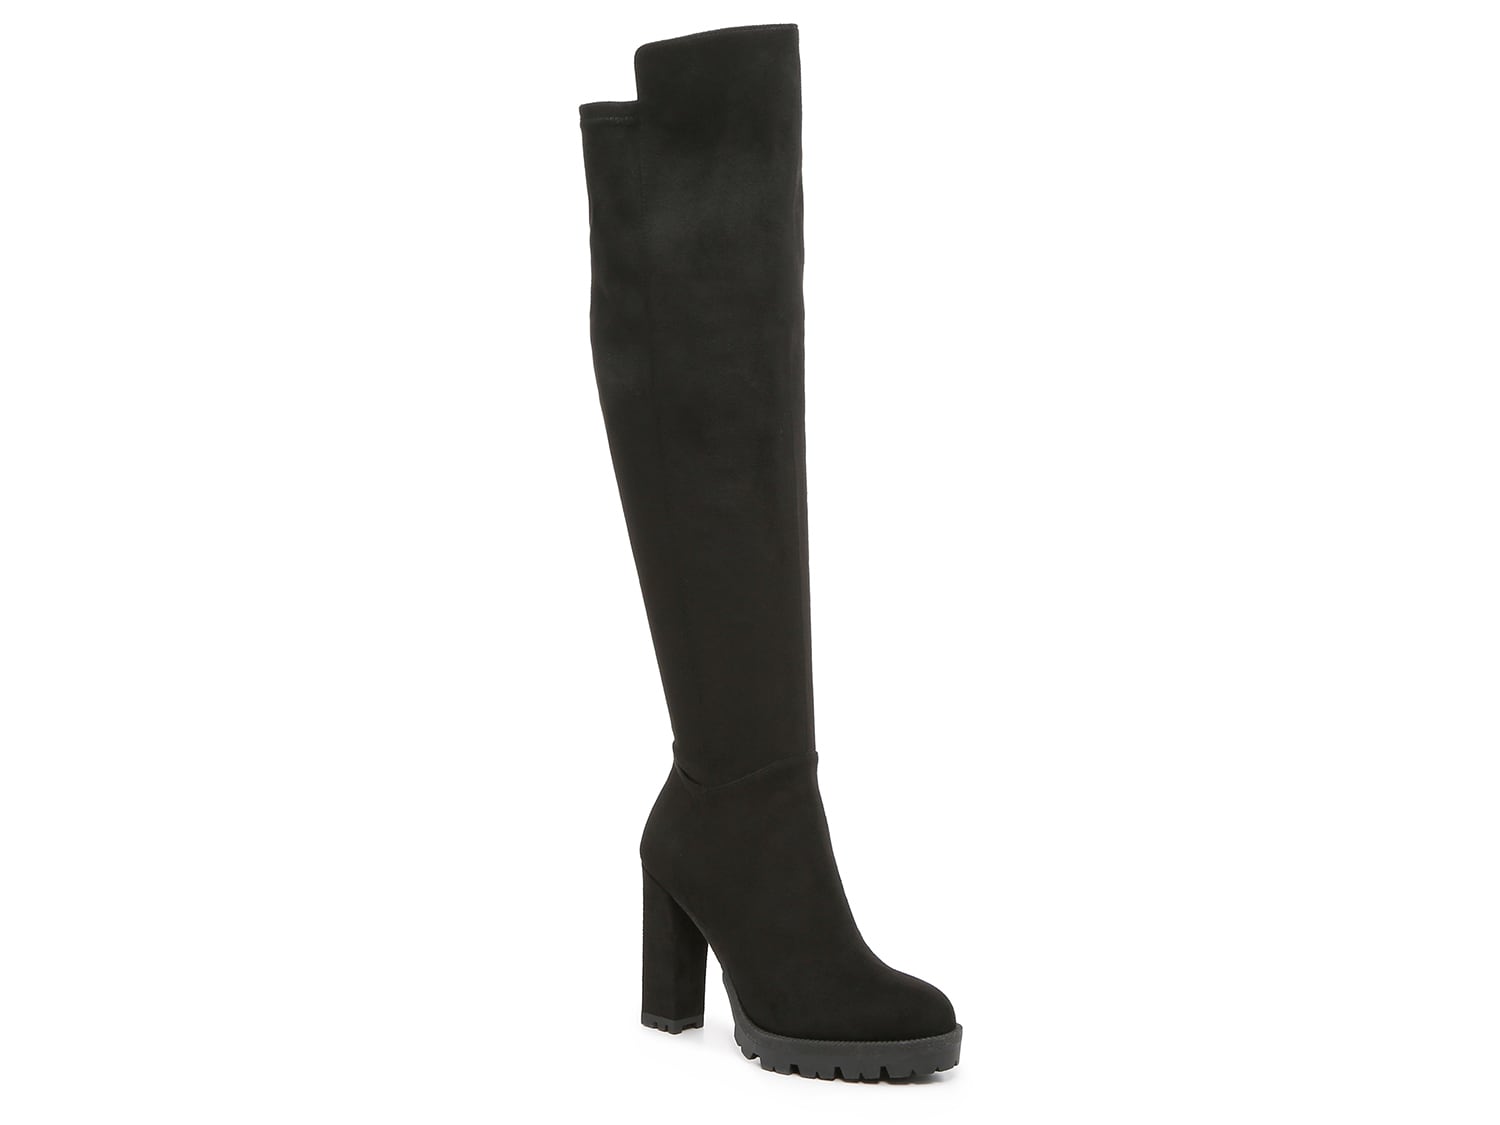 JLO JENNIFER LOPEZ Harlie Over-the-Knee Boot - Free Shipping | DSW